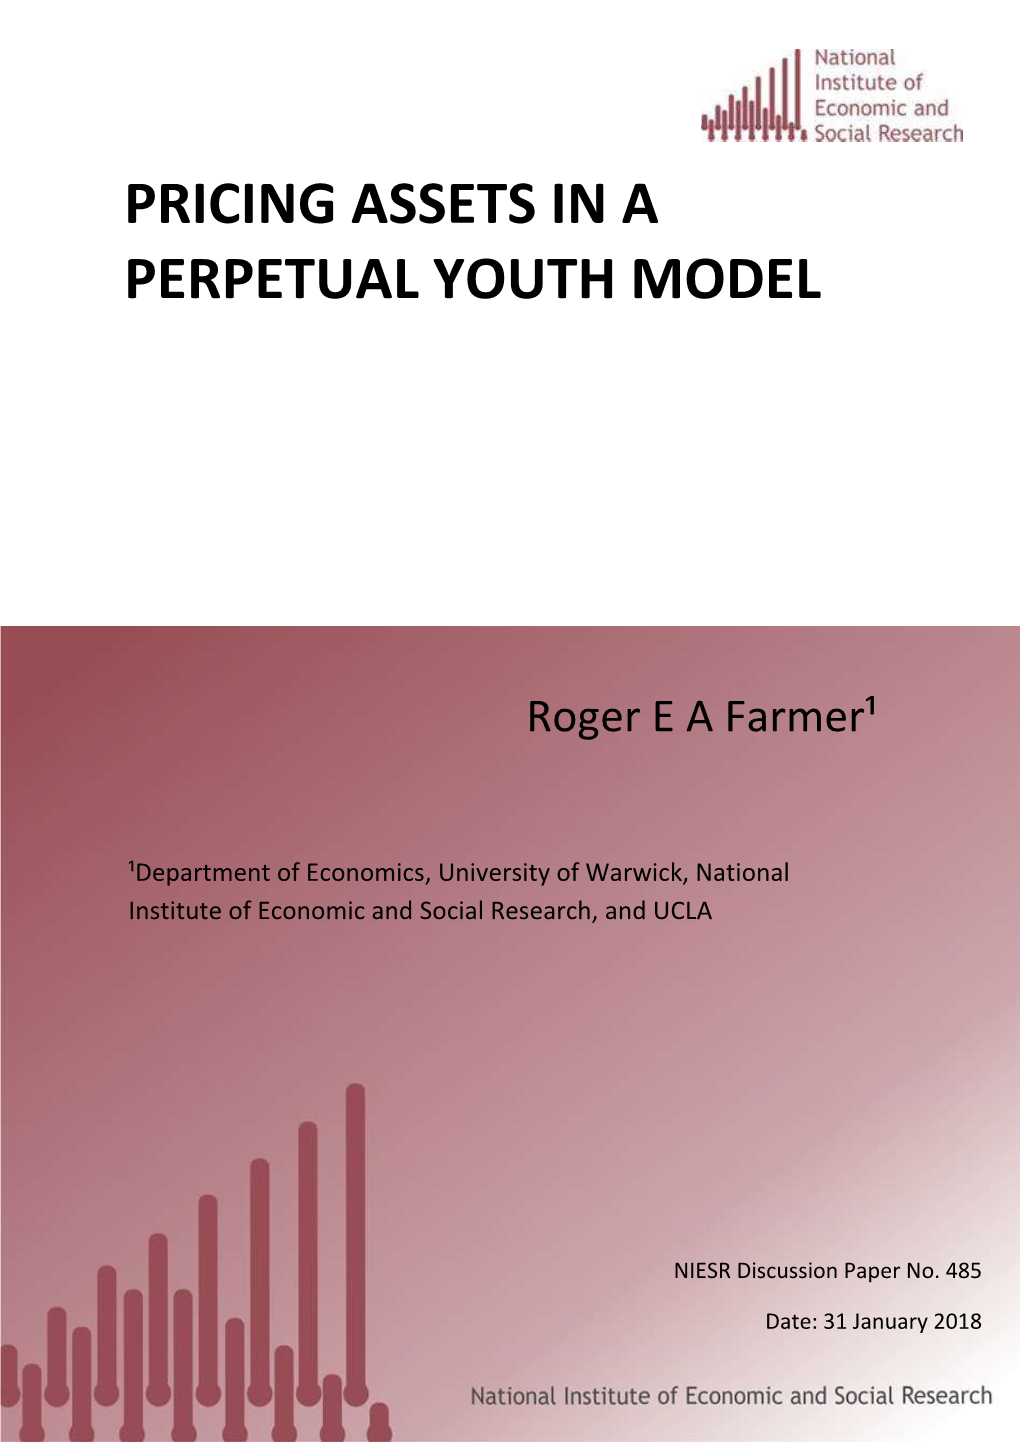 Pricing Assets in a Perpetual Youth Model